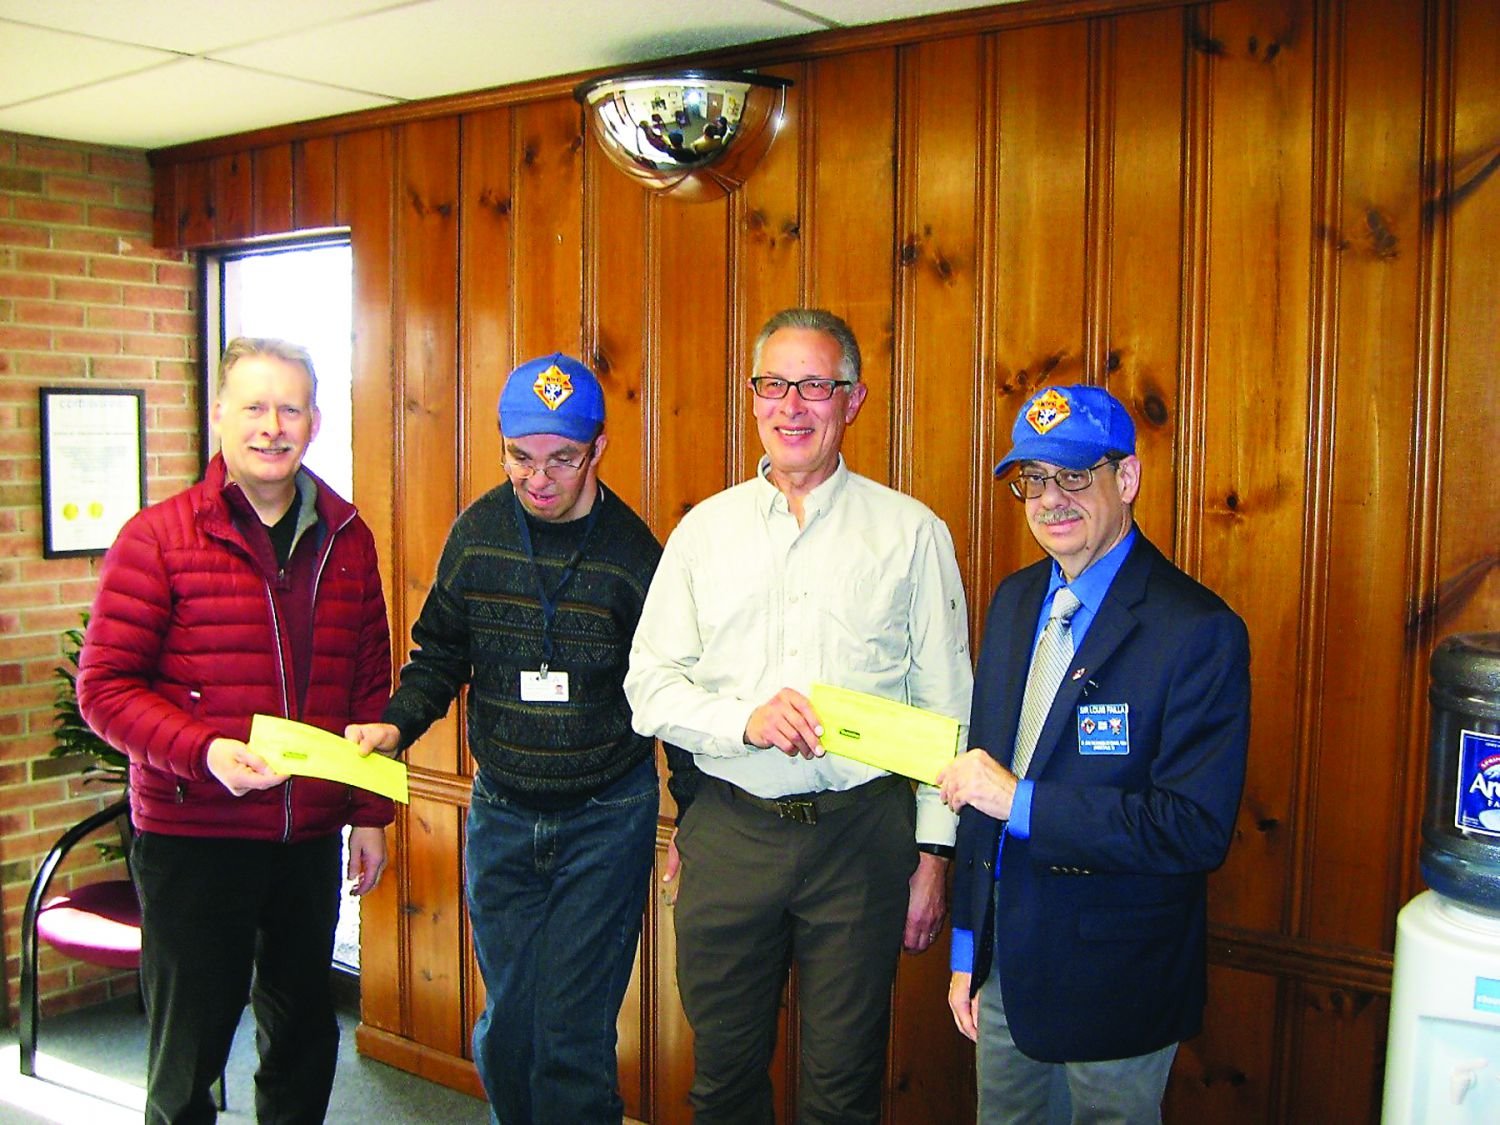 Participating in the Knights of Columbus check presentation are, from left, Jeff Mattison, executive director, The Arc of Hunterdon County; John Paul Gontarski, Knights of Columbus member as well as CEA Extended Employee and Arc participant; Michael Skoczek, CEA’s president and CEO; and Lou Failla, Knights of Columbus Grand Knight, Lambertville, N.J., chapter.